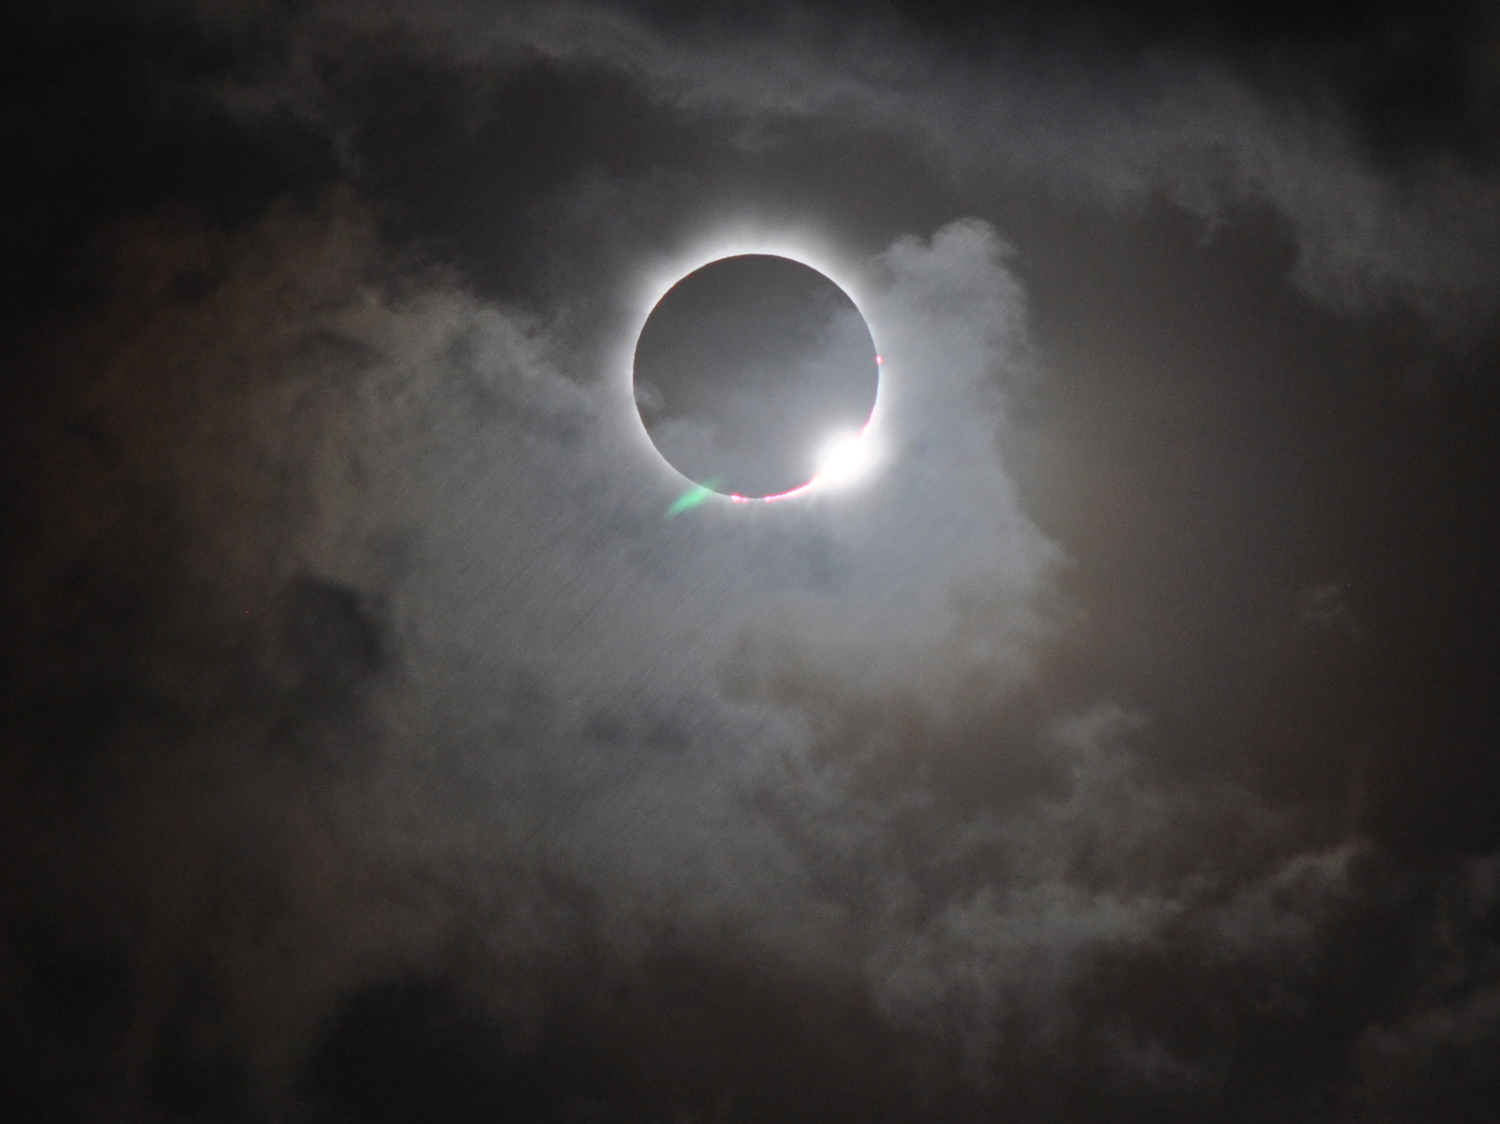 Come watch a live stream of today’s total solar eclipse